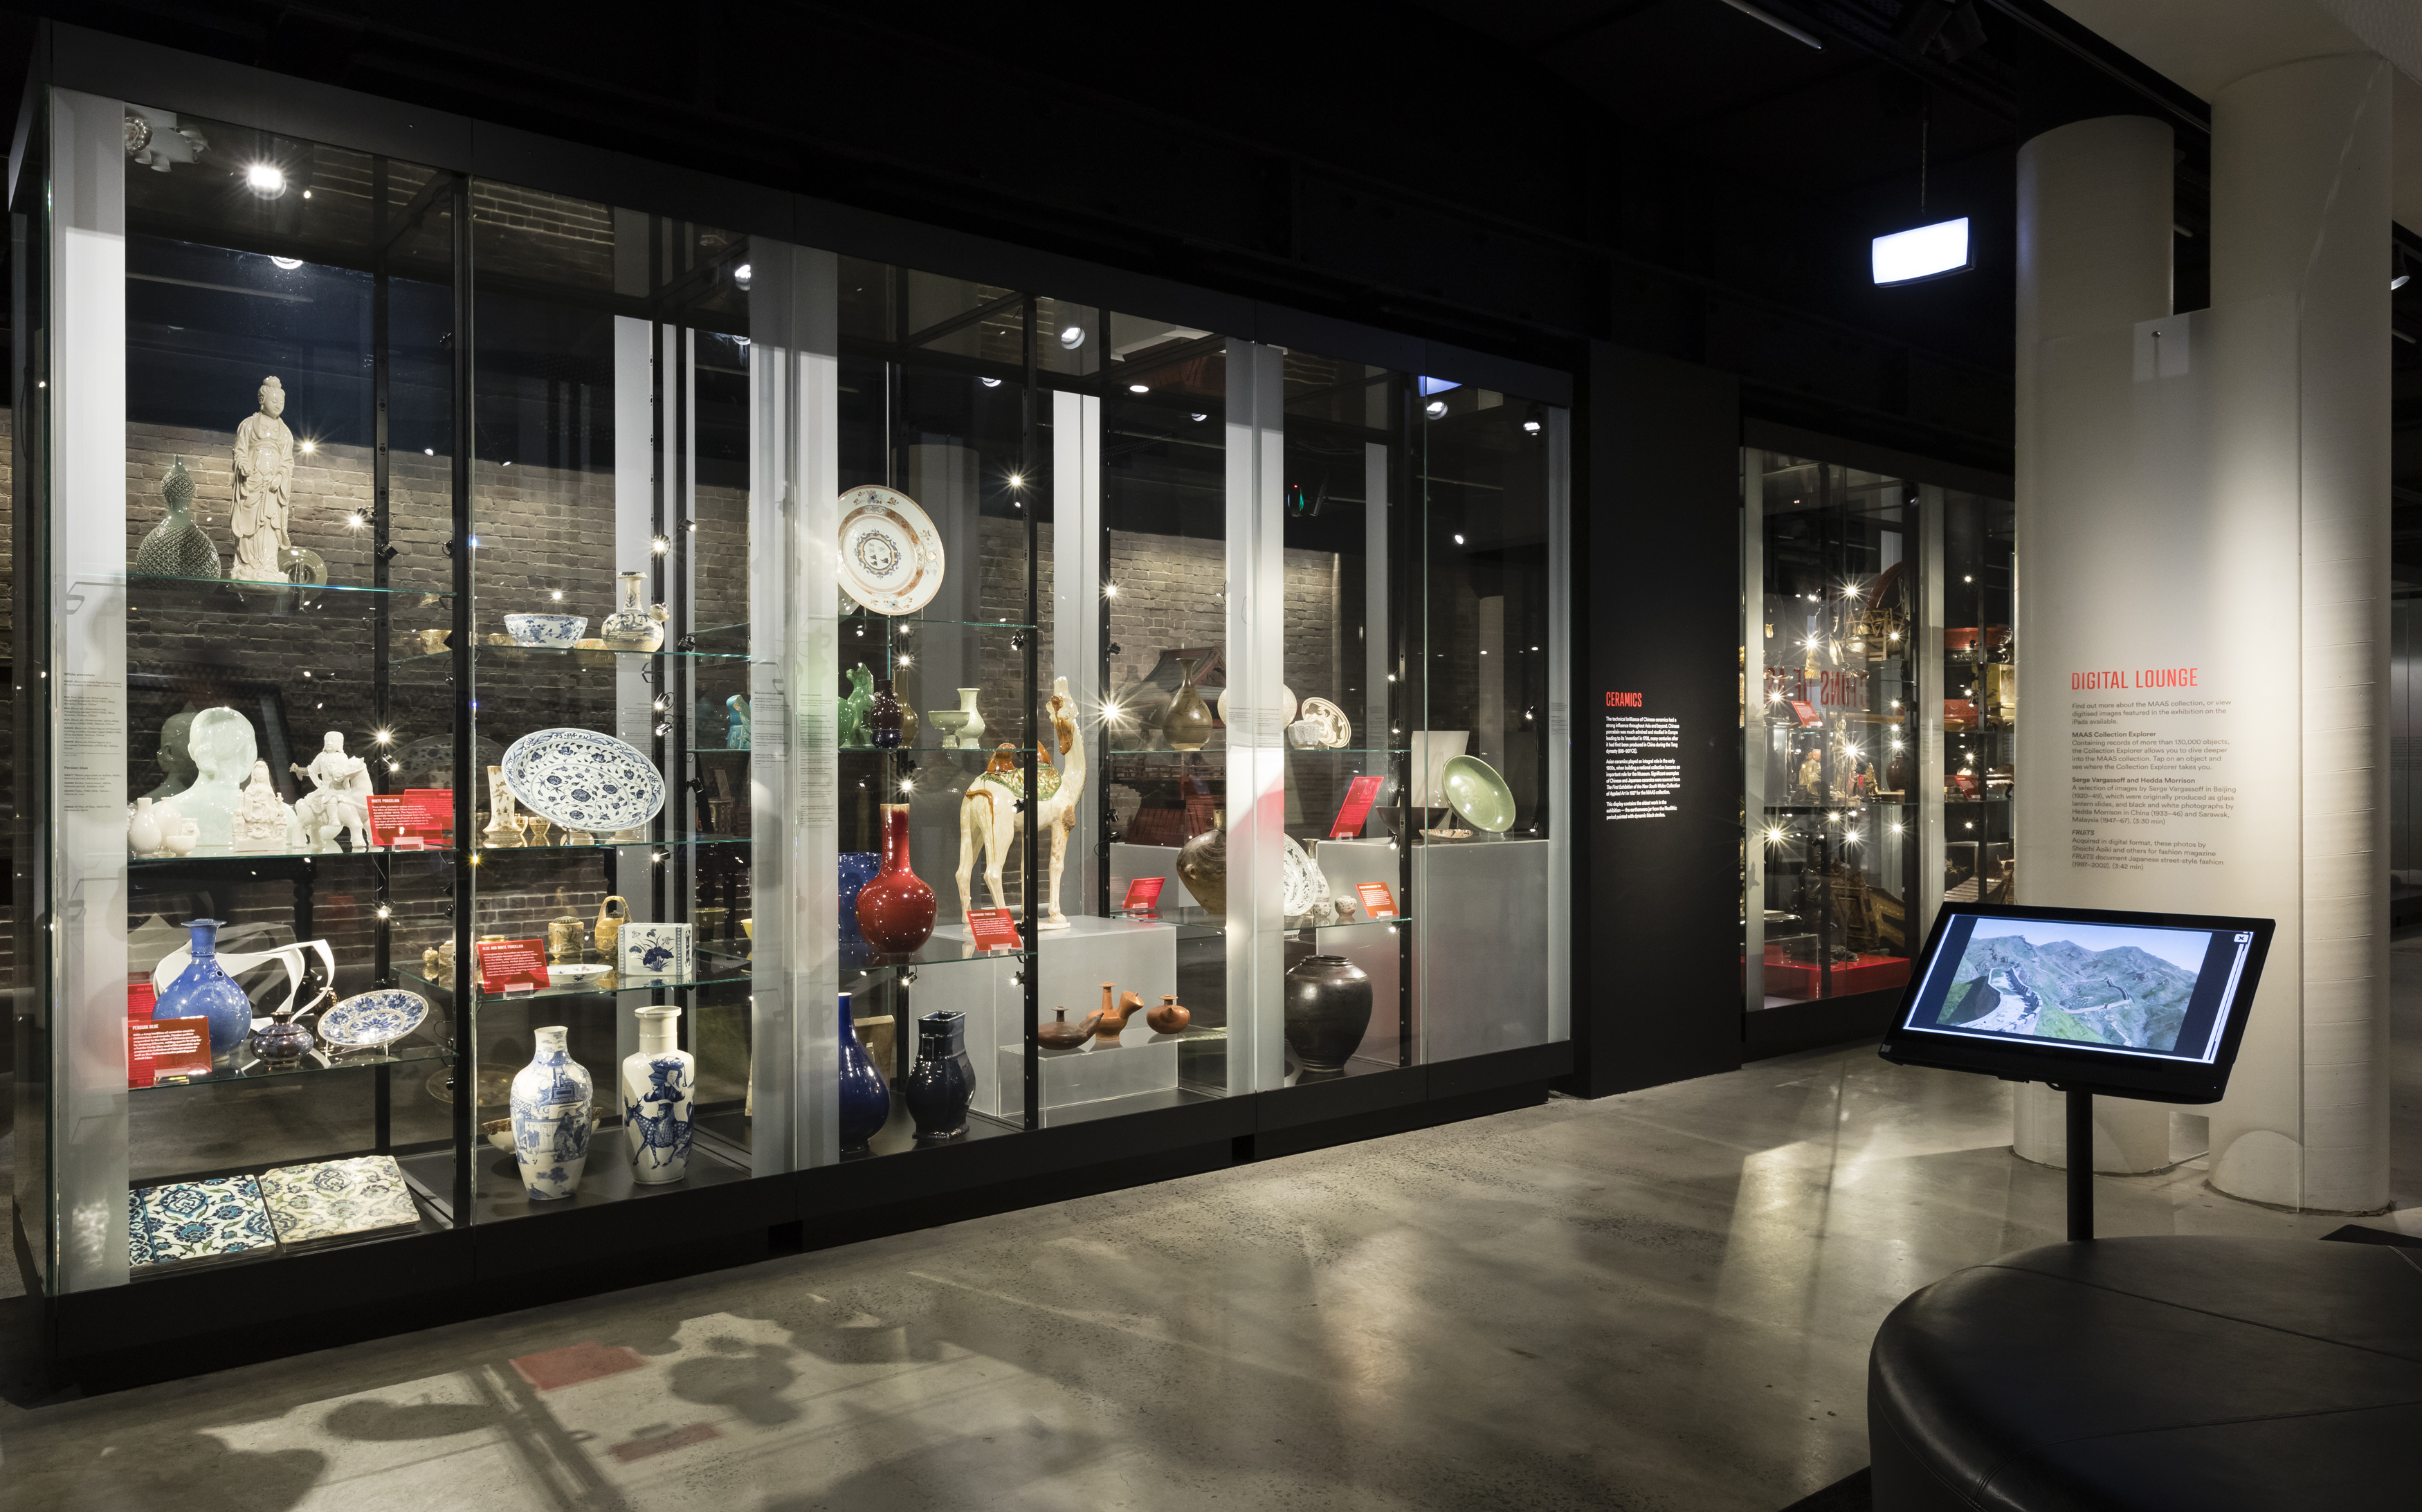 View of tall glass showcases with about 50 large and small ceramic pieces on shelves. On the left, digital lounge with a computer screen is shown.